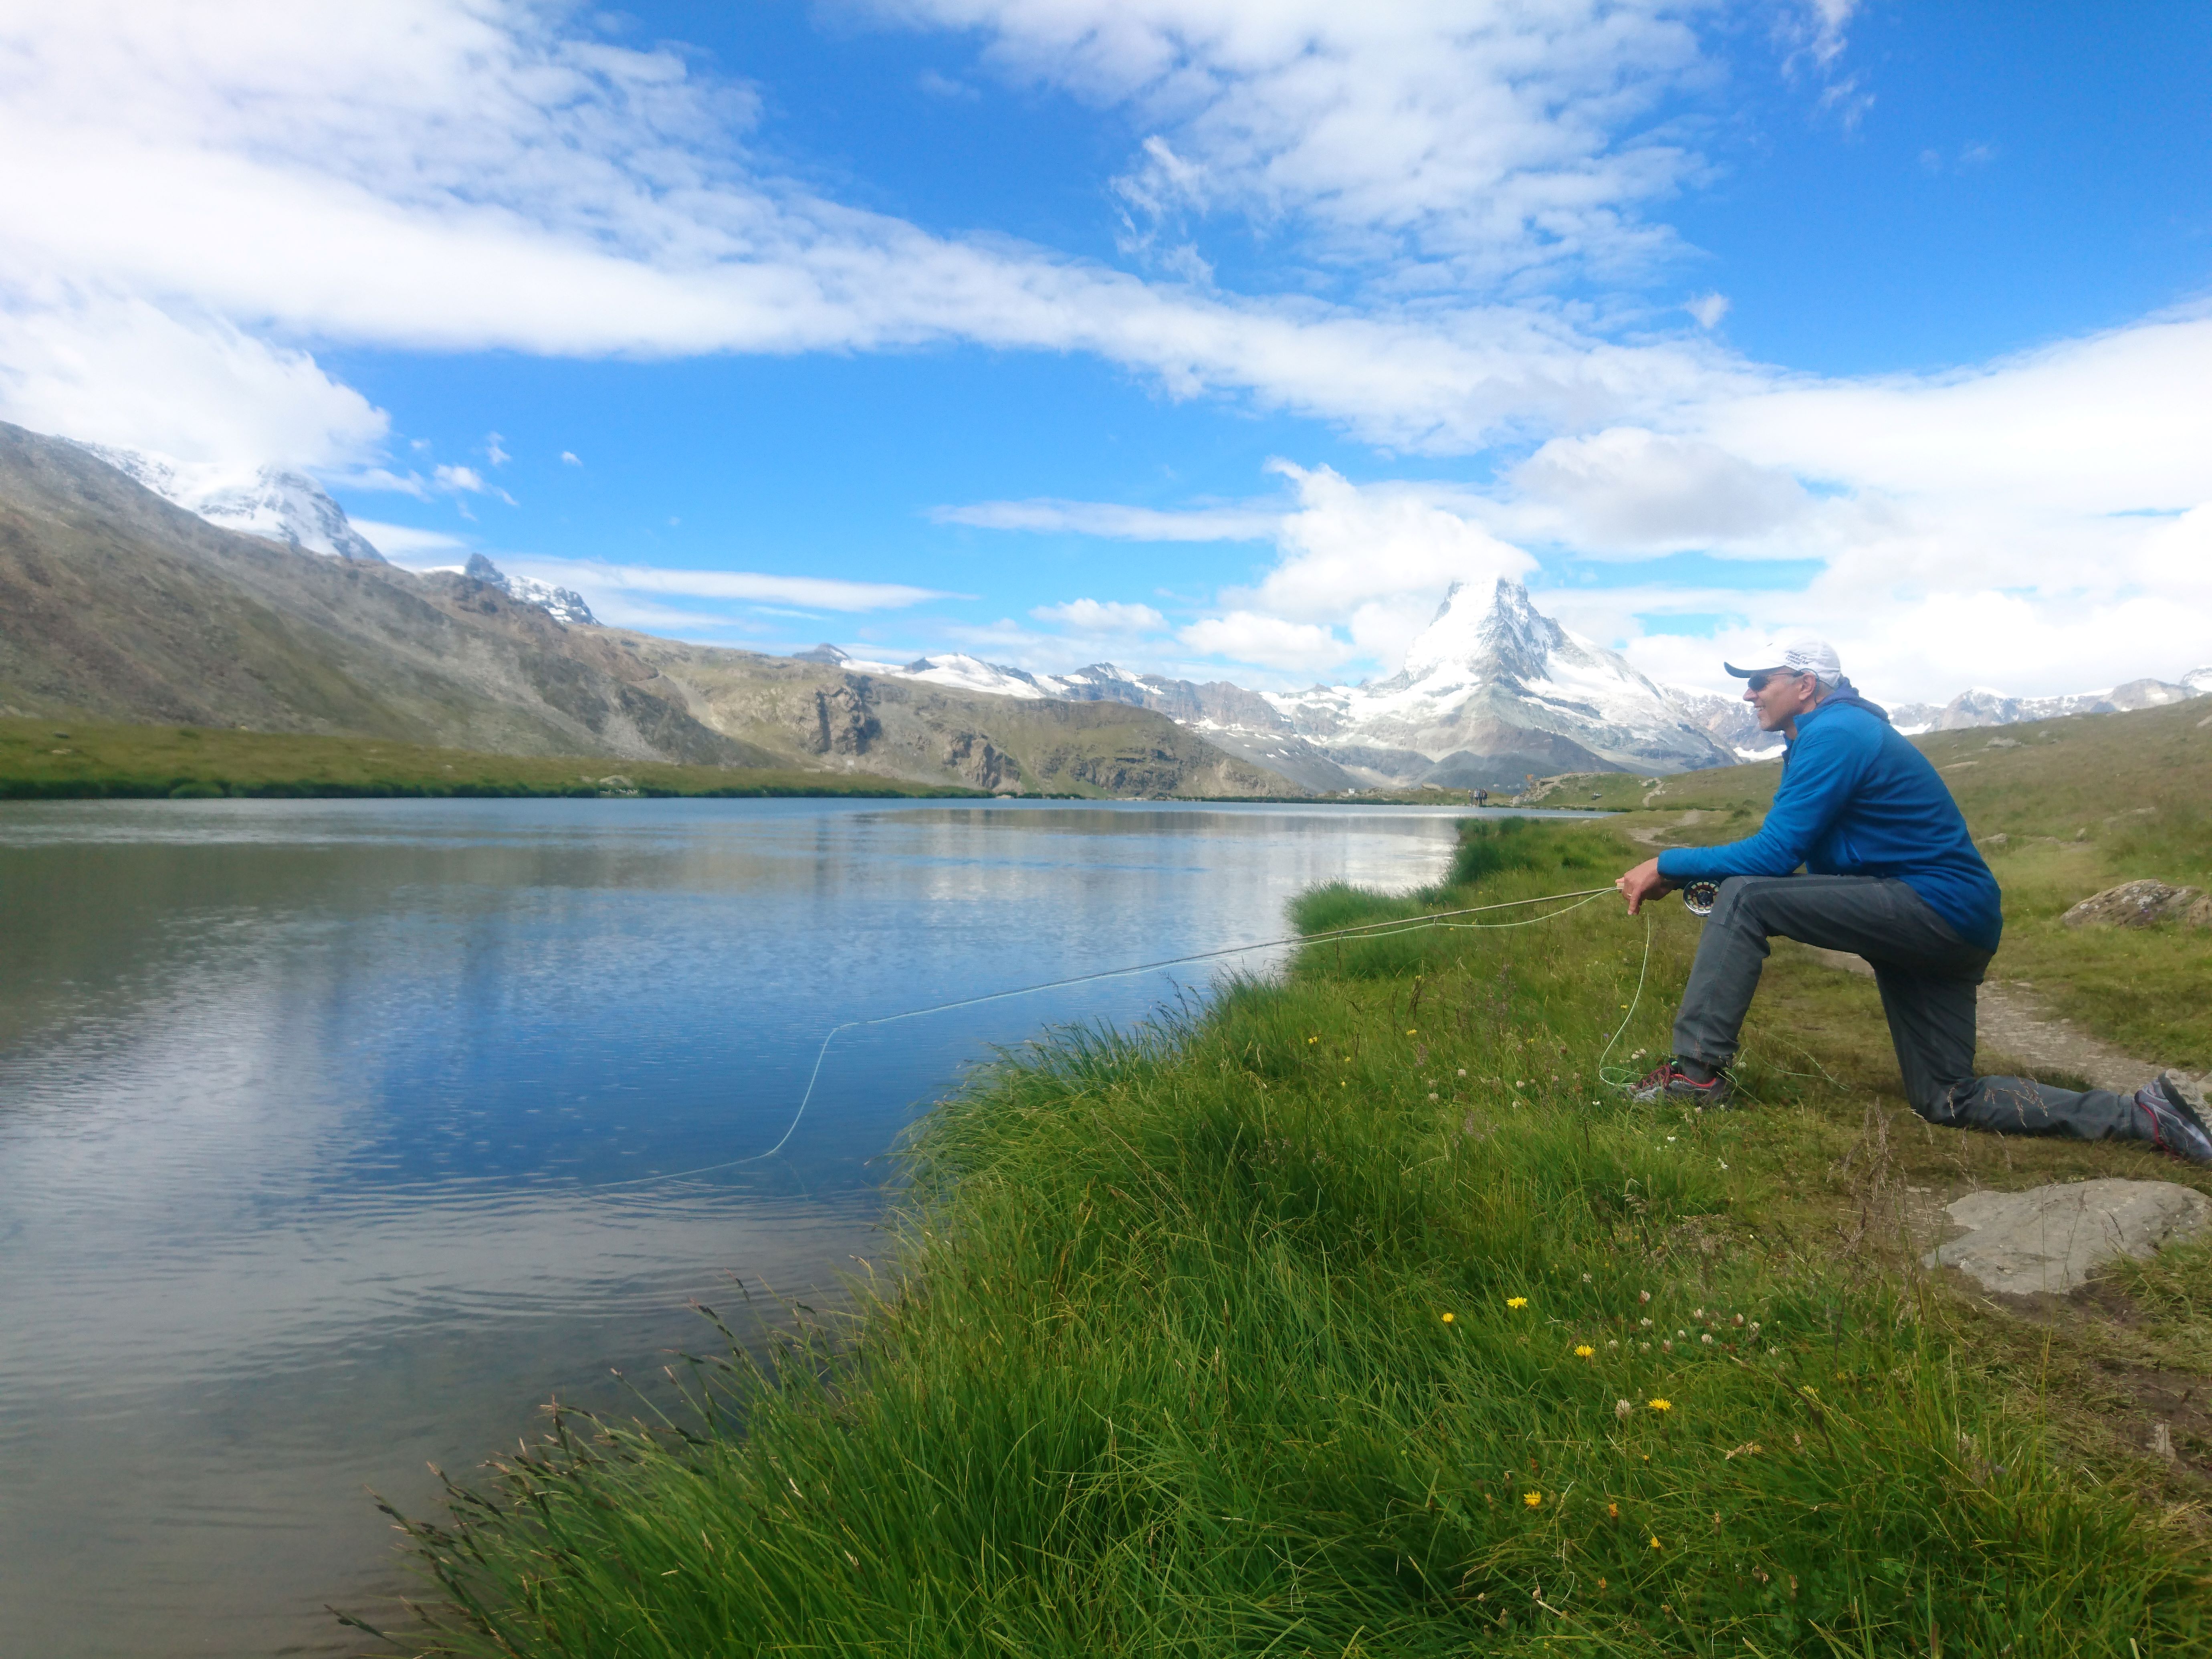 Fly Fishing in Switzerland, stalking at the foot of the Matterhorn